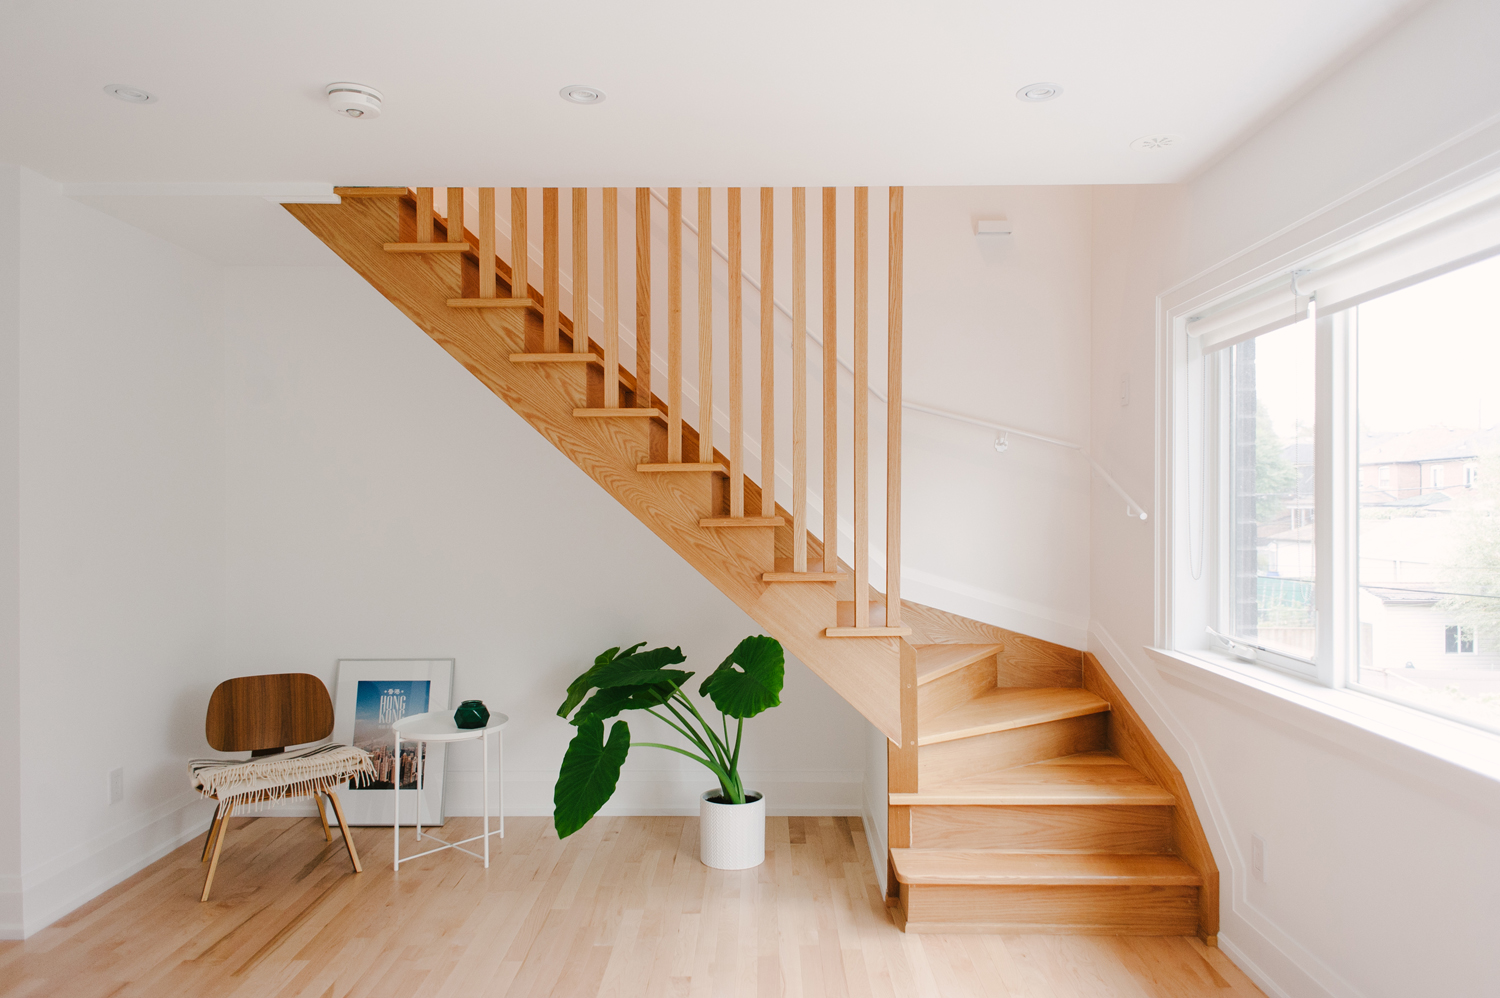 Wood stairs curving in a corner